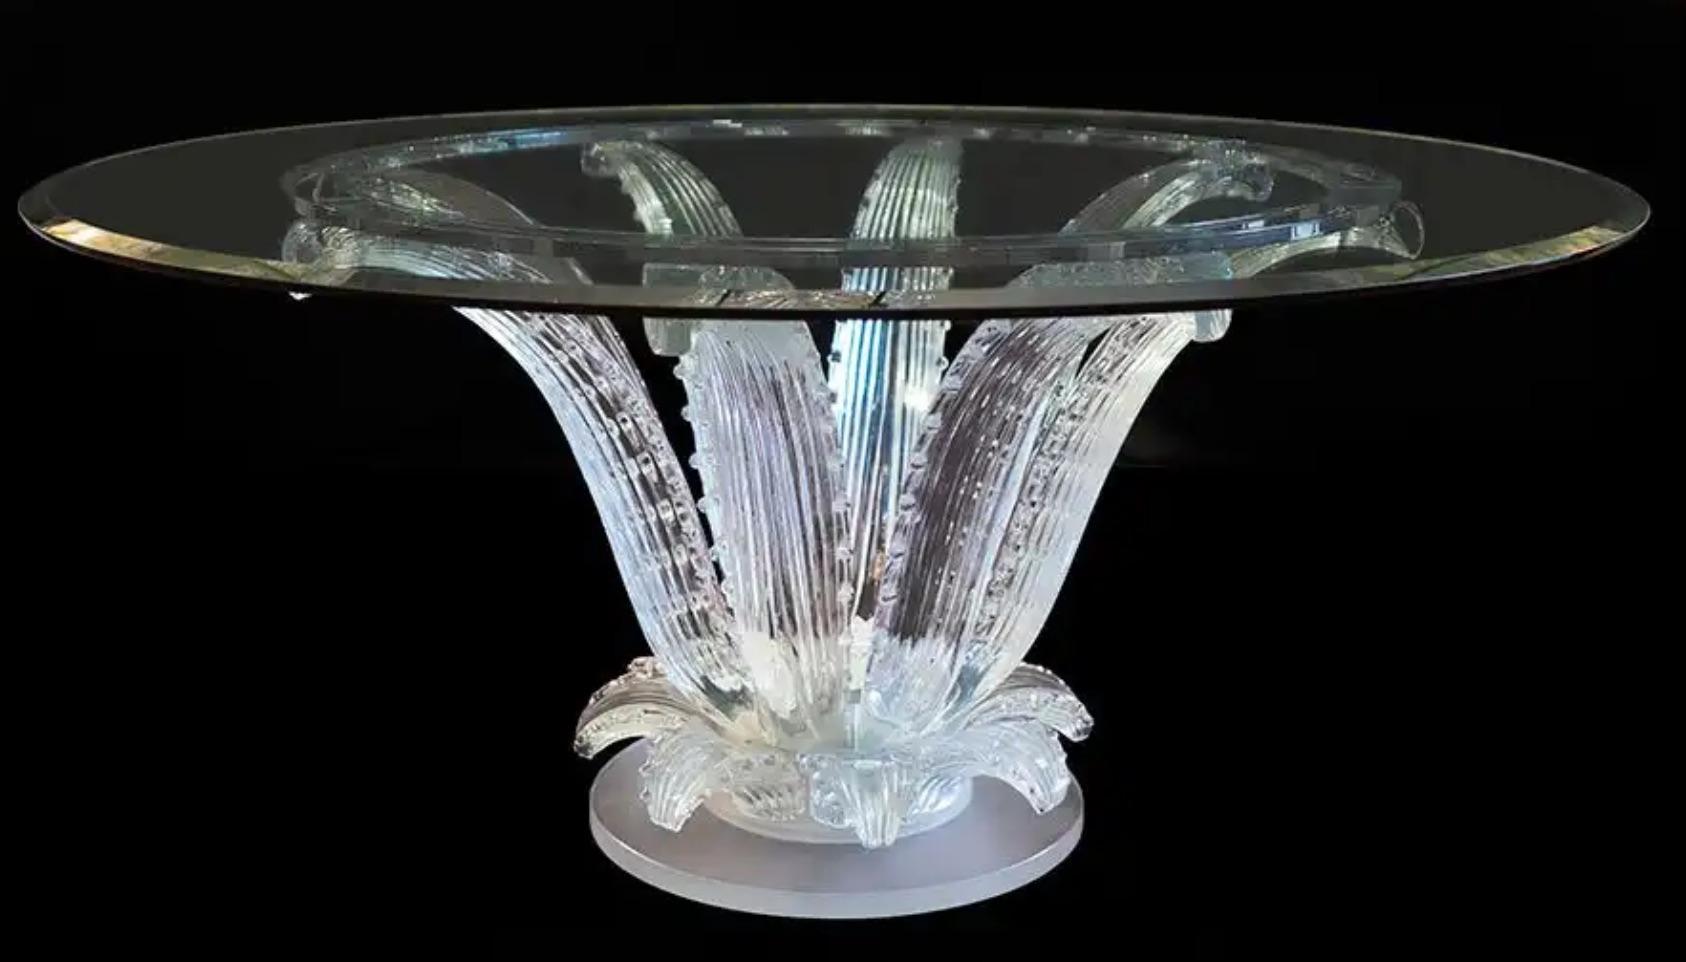 Designed in 1951 by Marc Lalique, the Cactus table seamlessly blends into the most creative interior design spaces: sublime crystal in prolific magnificence. The crystal volutes follow the rhythm of light, drowning the eye in its depths.
This